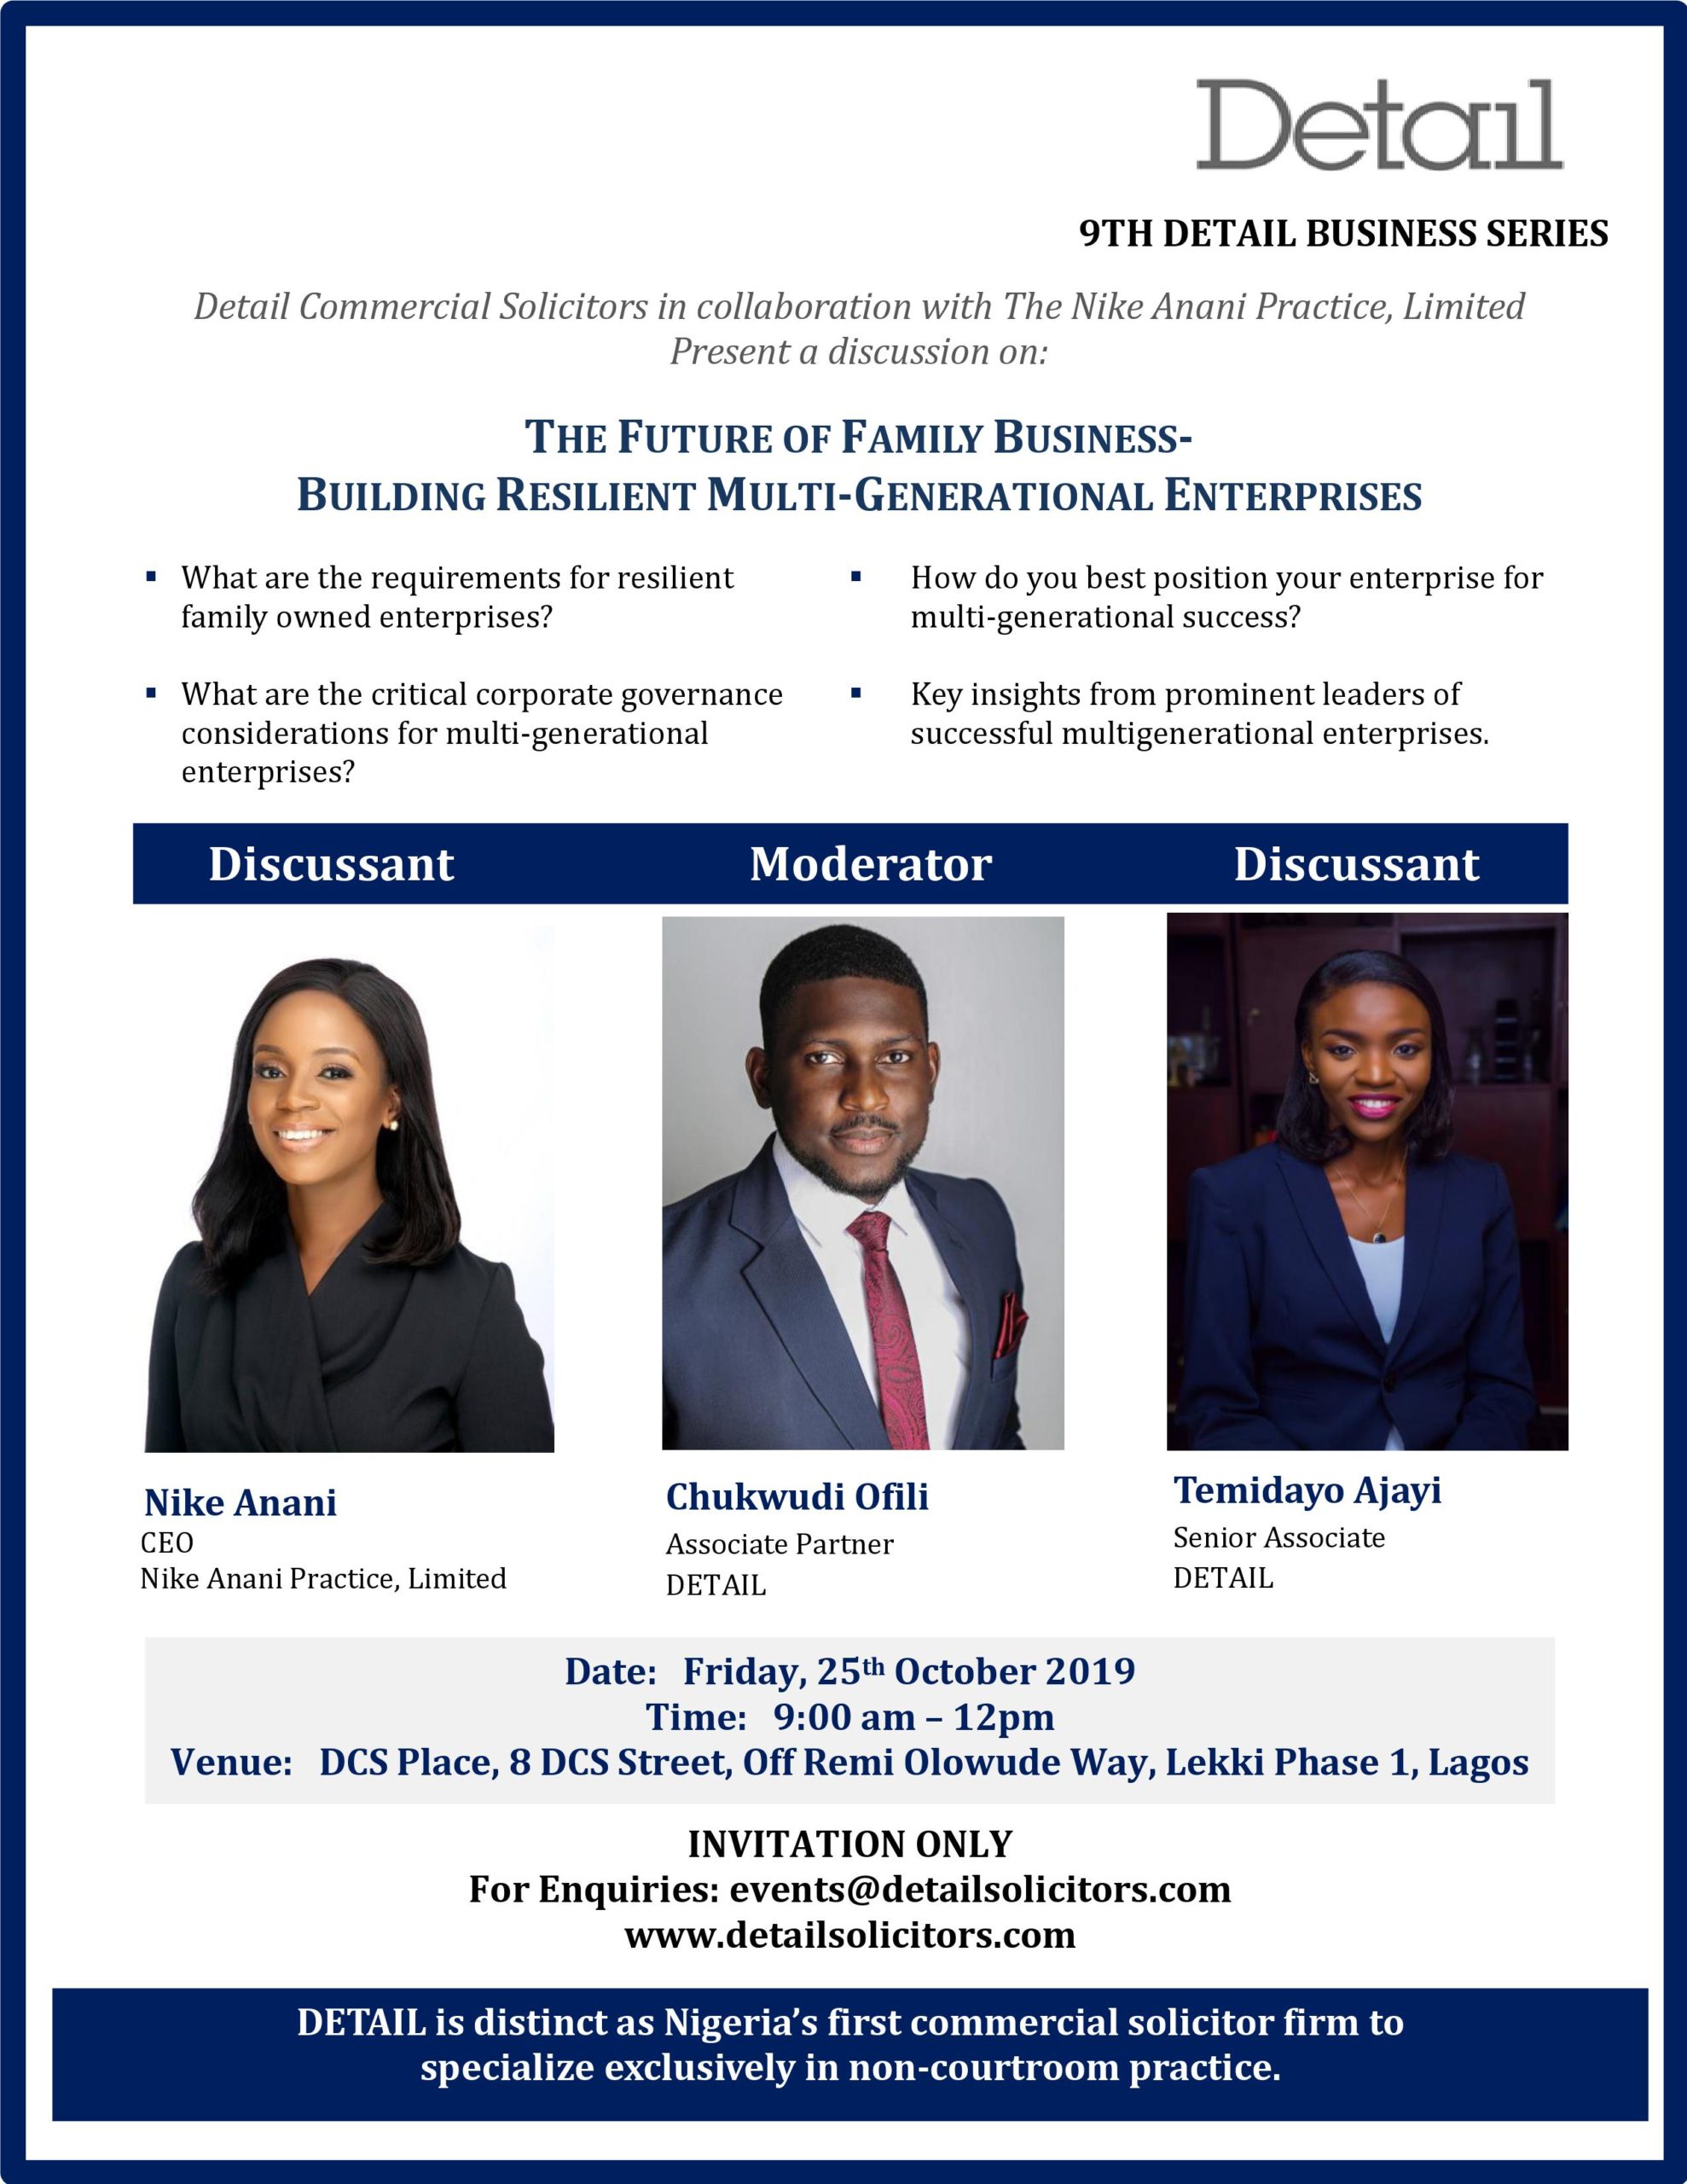 DETAIL hosts it’s 9th Business Series in collaboration with The Nike Anani Practice Limited on: “The Future of Family Business- Building Resilient Multi-Generational Enterprises.”